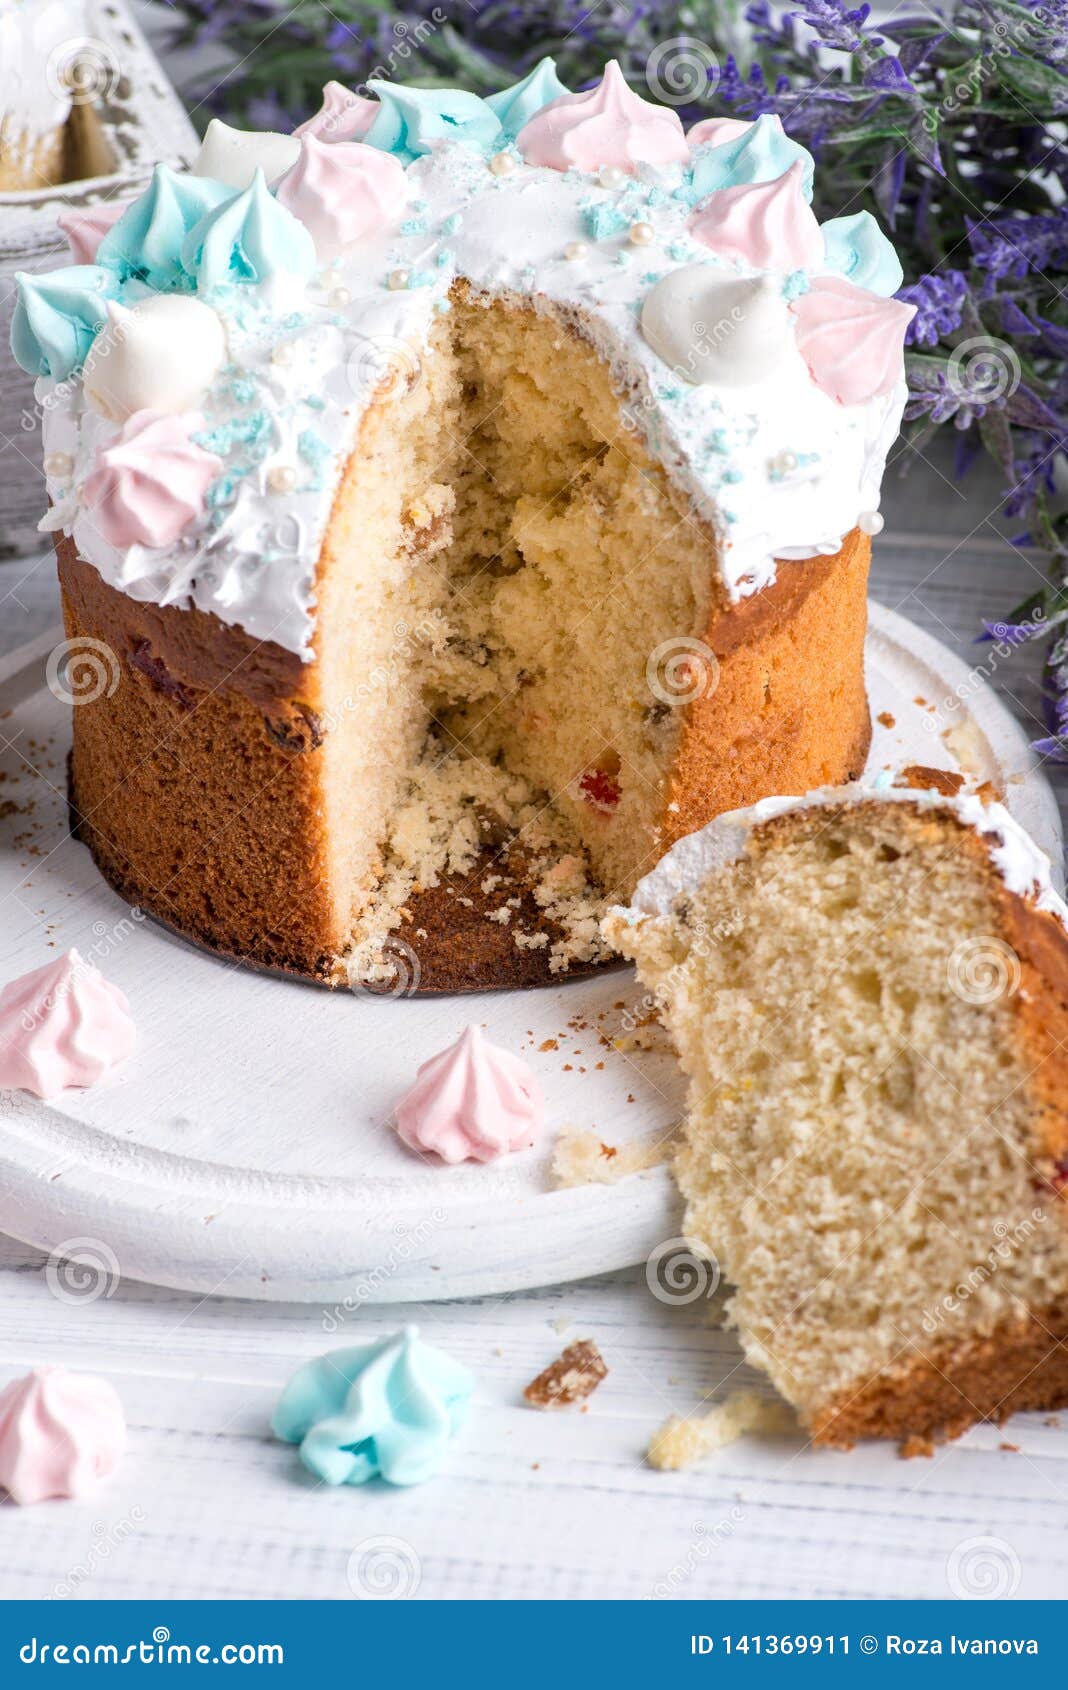 Tasty Decorated Easter Cakes Lie On A Round White Wooden ...